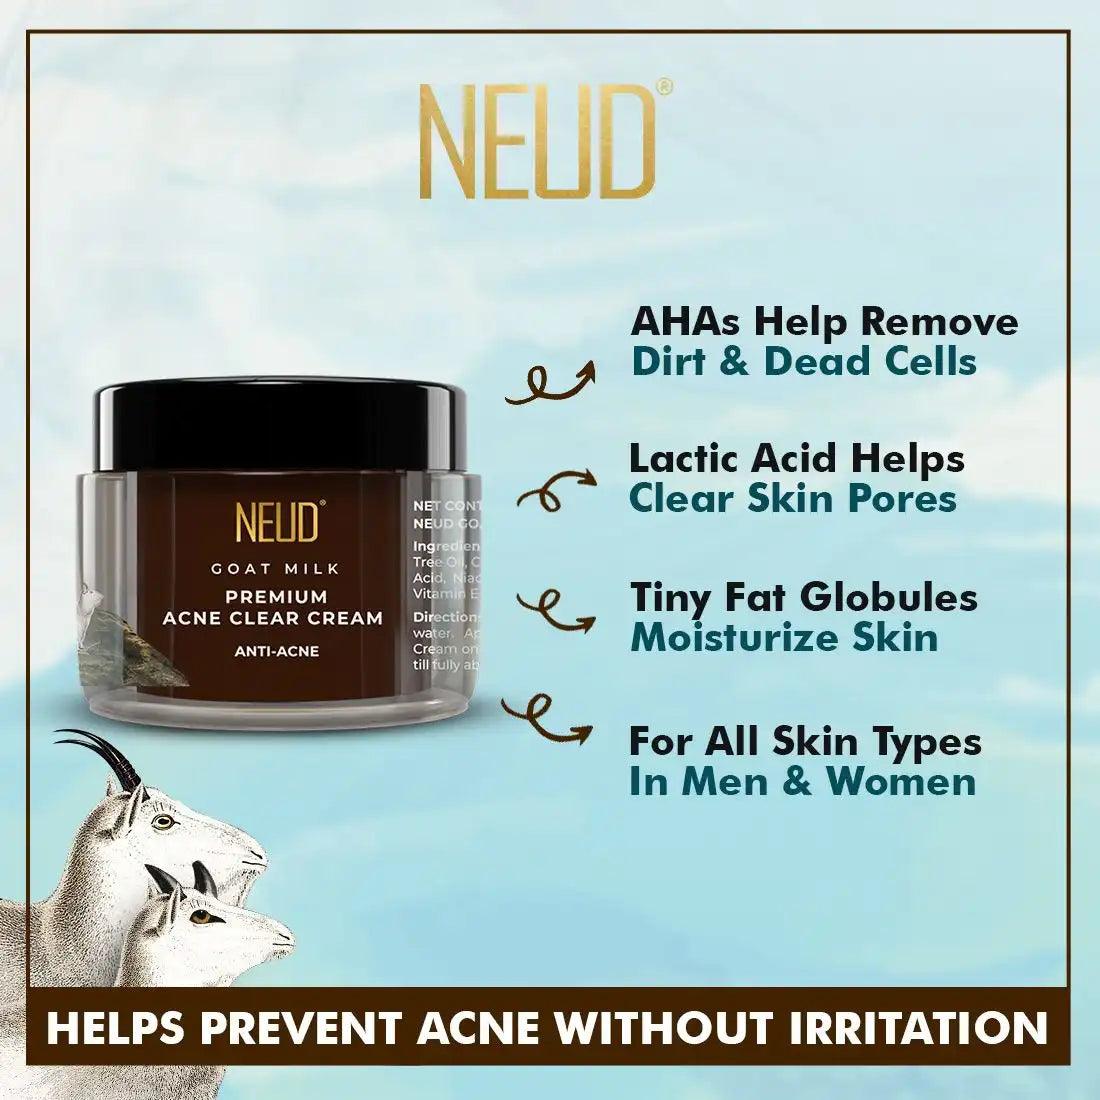 NEUD Goat Milk Acne Clear Cream Contains AHA and Lactic Acid That Help Exfoliate and Clear Skin Pores - everteen-neud.com